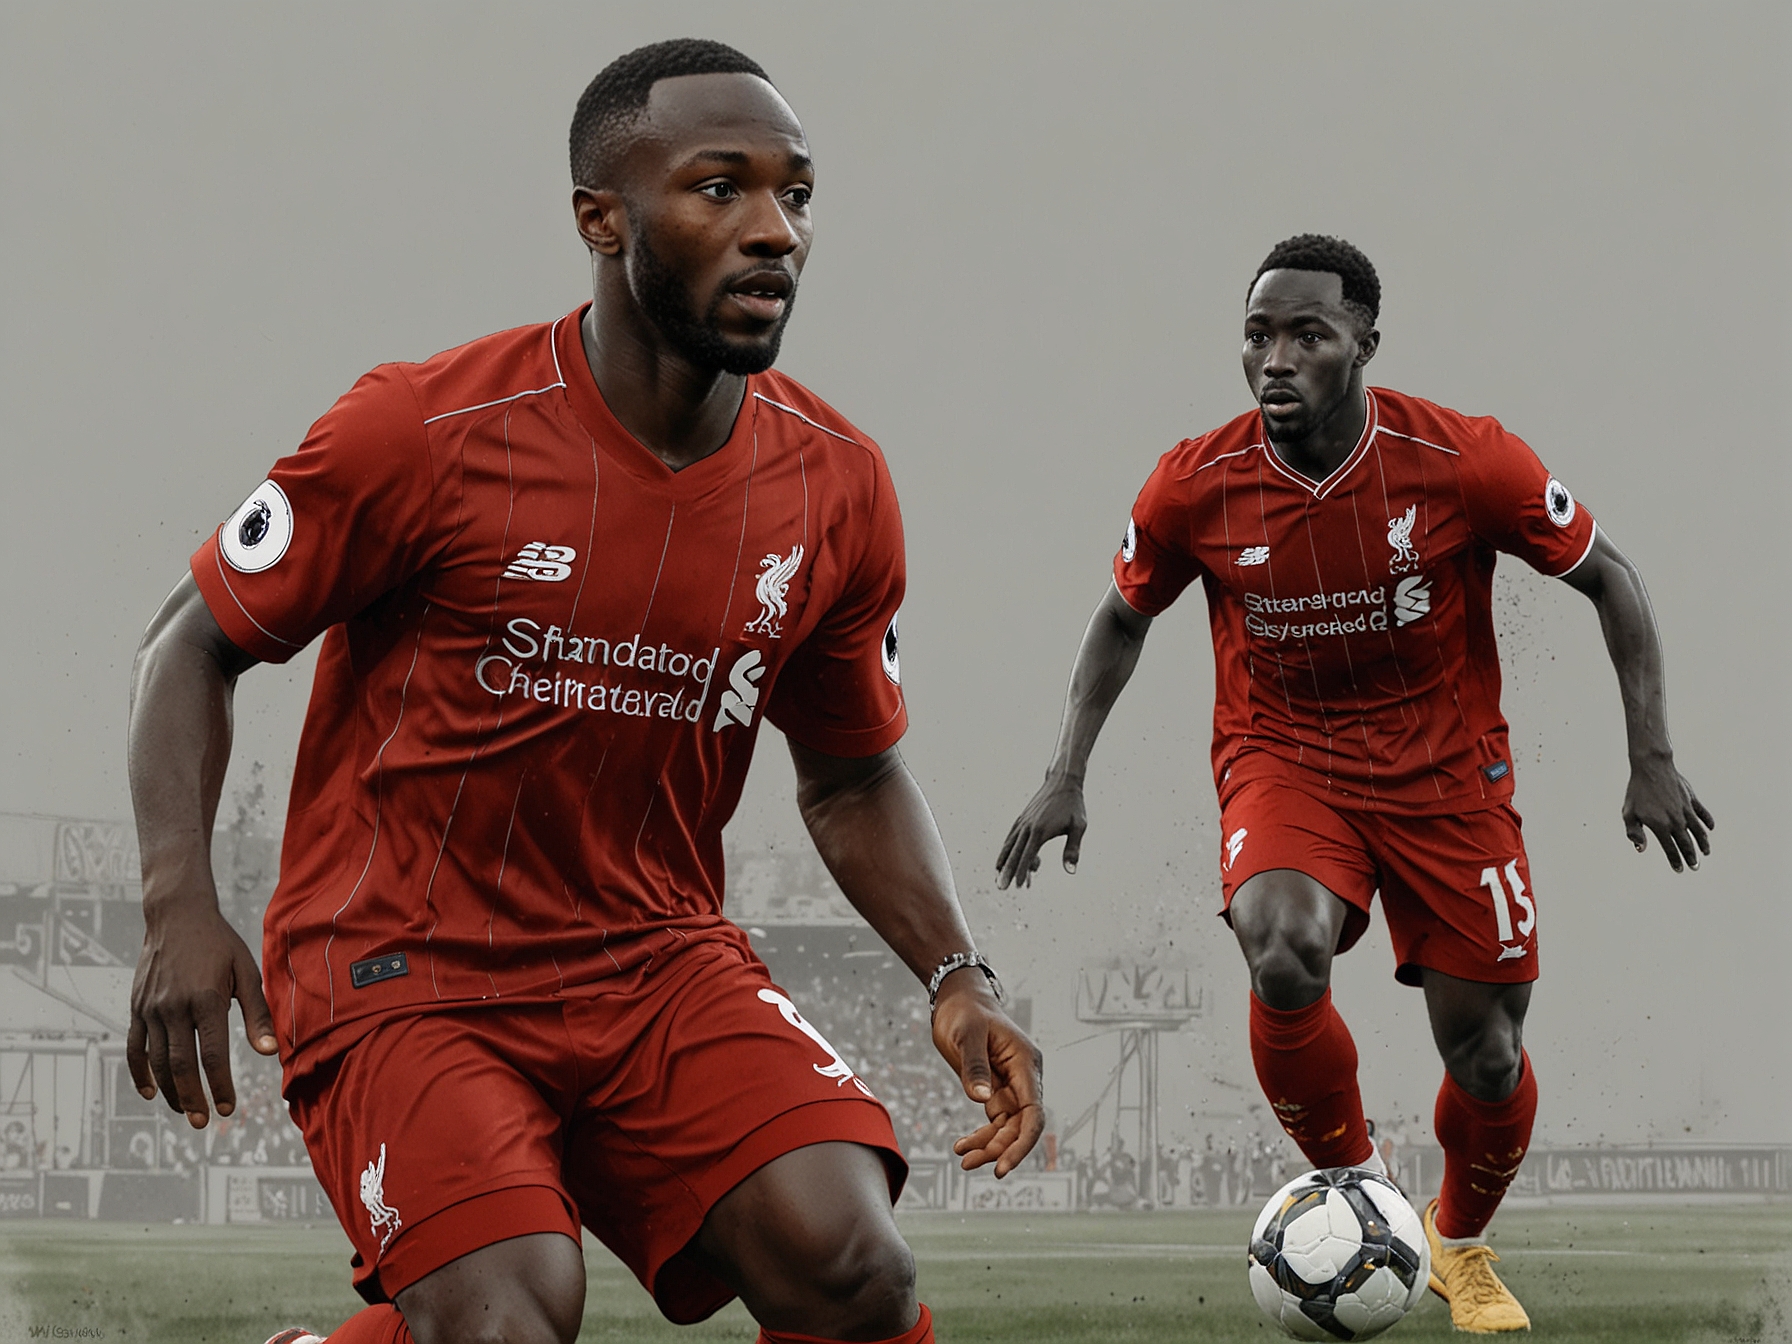 Naby Keita in action for Liverpool, showcasing his dribbling and passing skills, reflecting the potential Arsenal sees in him despite his inconsistent performance at Liverpool.